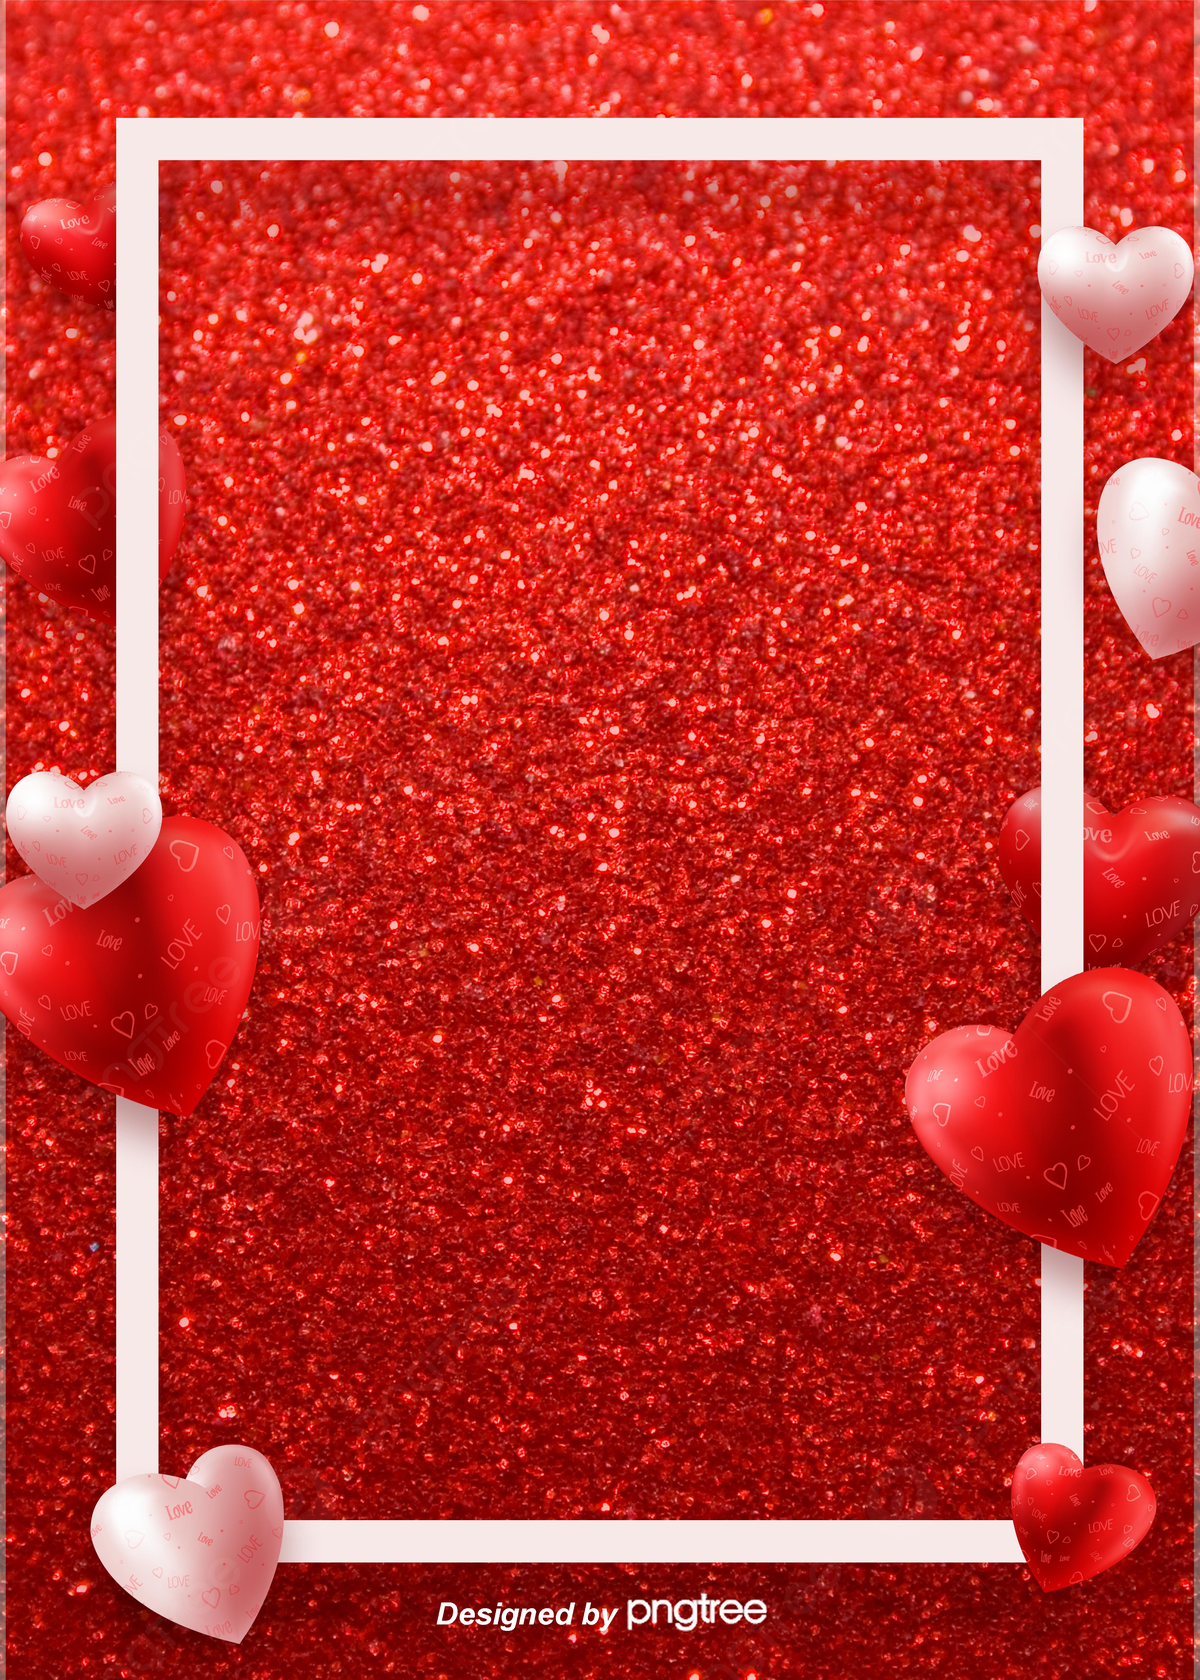 Red simple valentines day love romantic background love wallpaper valentines day romantic background image for free download